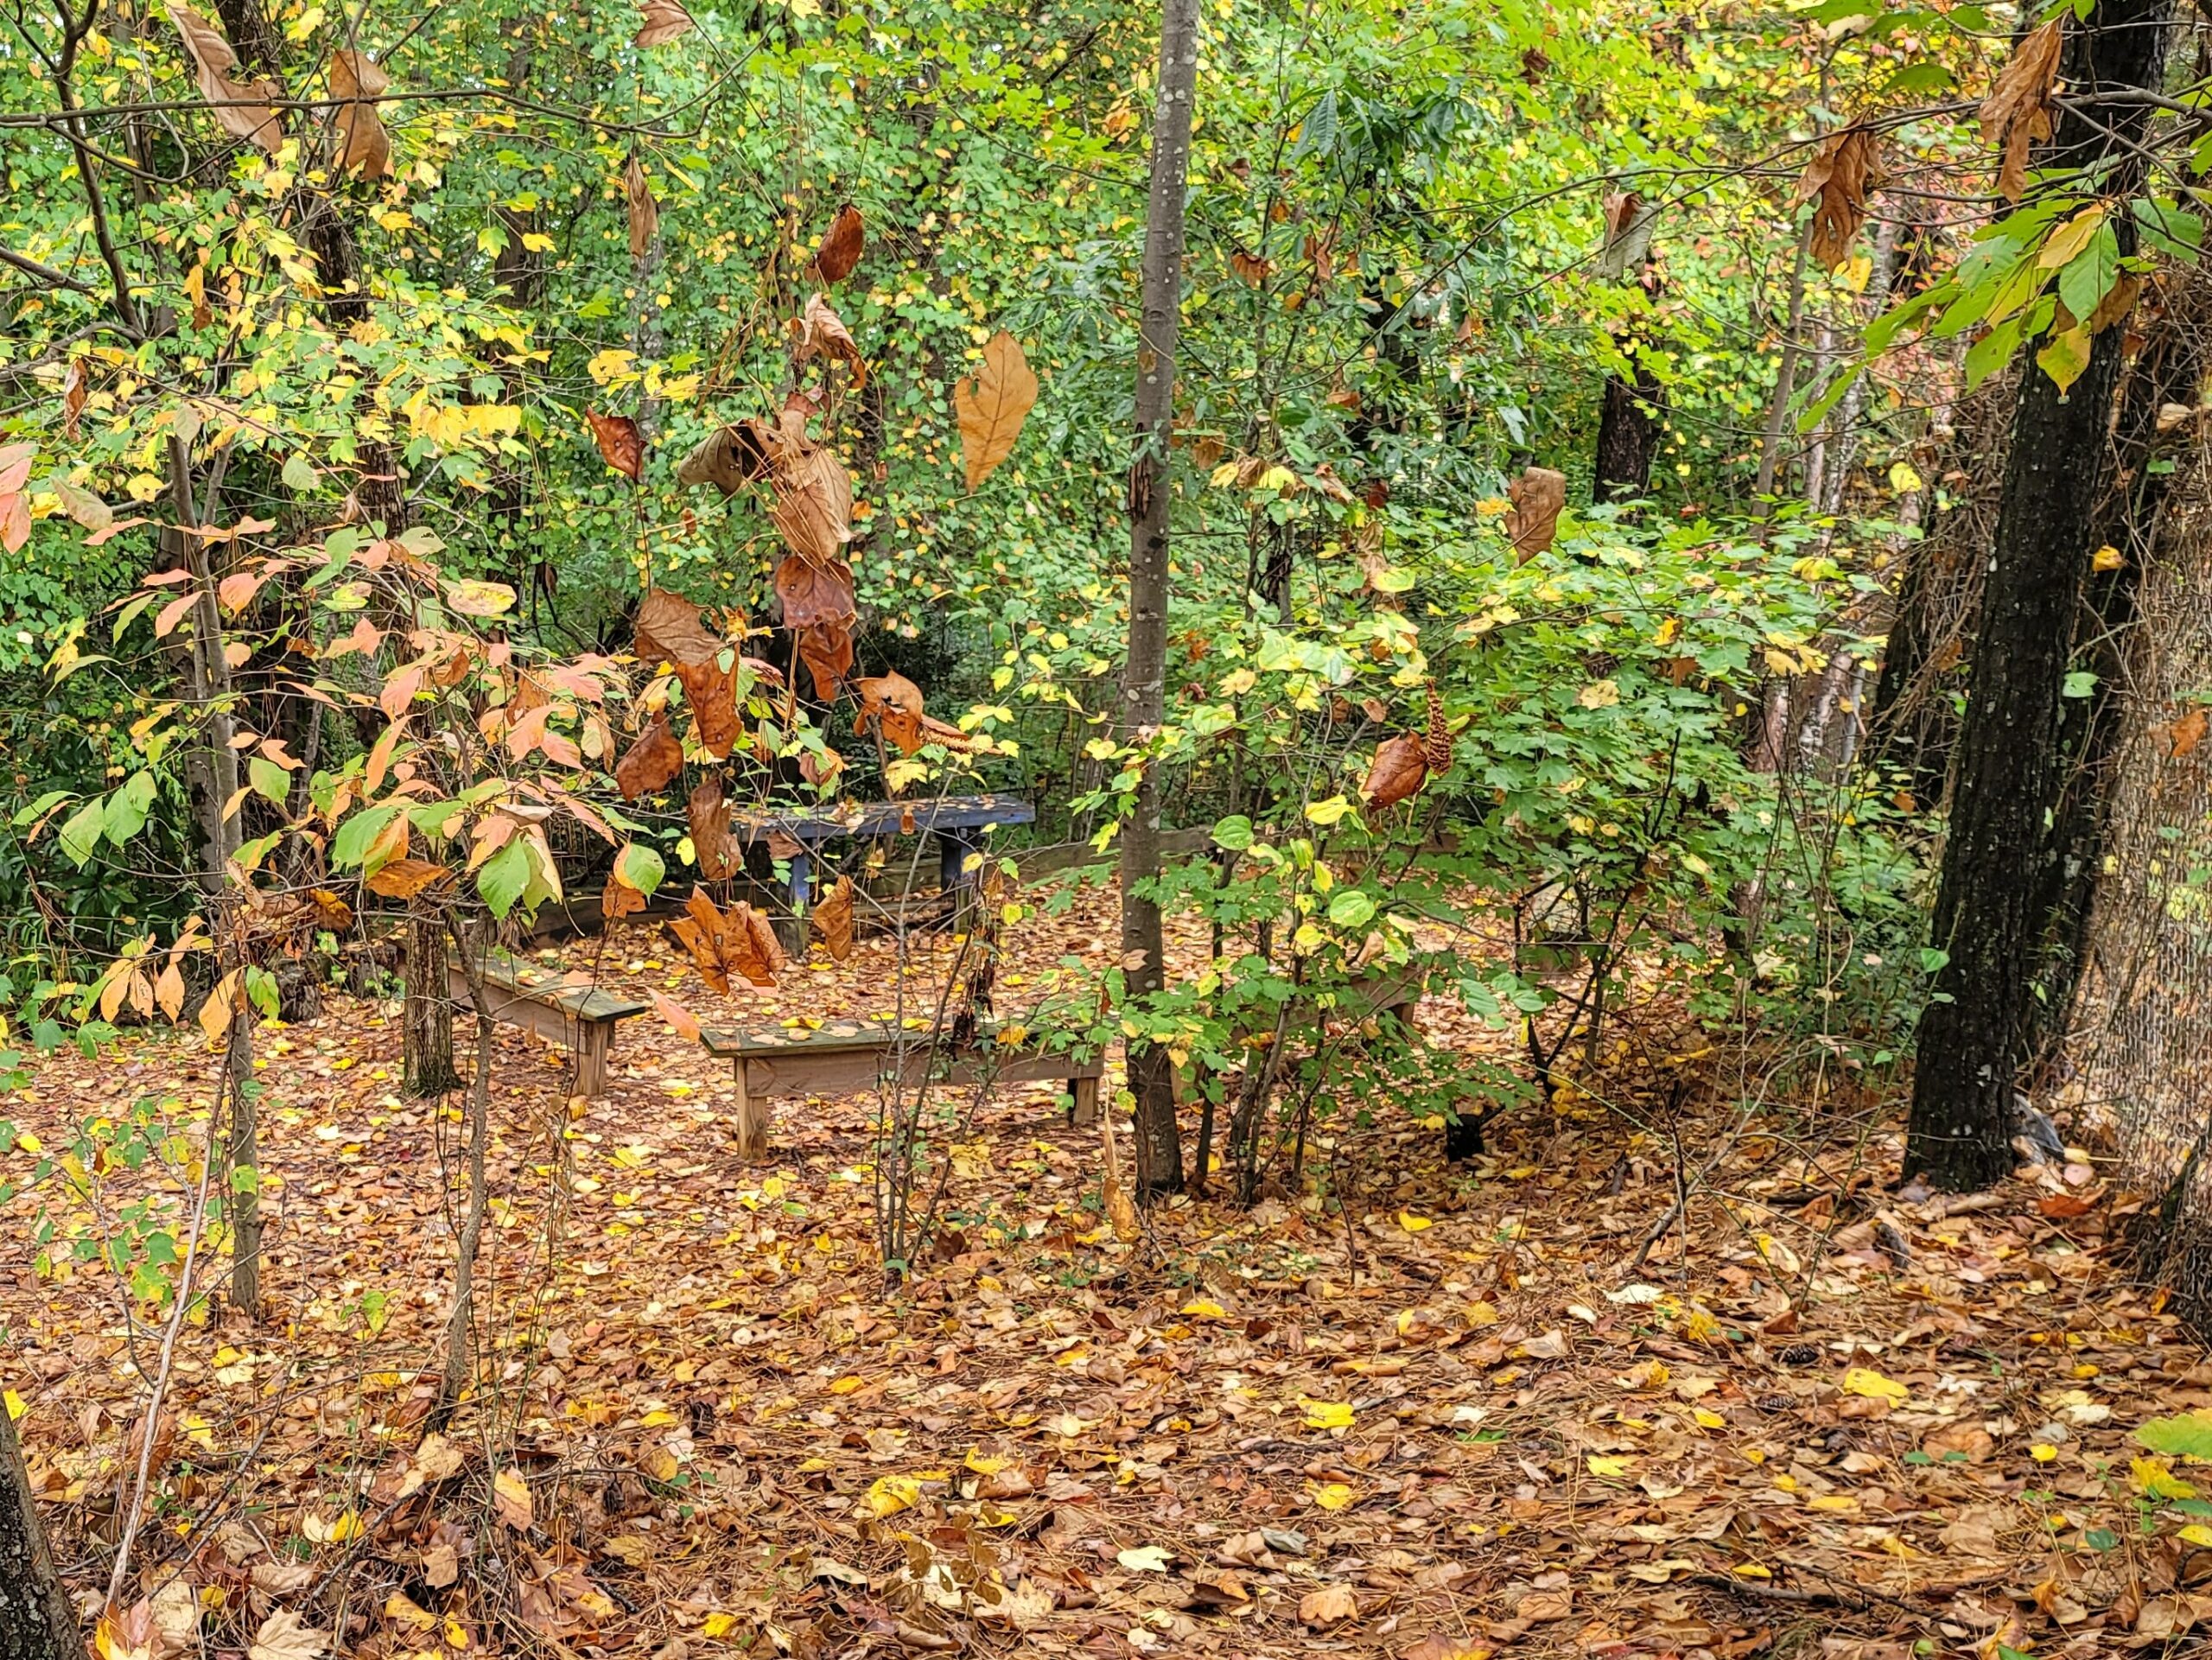 A circle of benches in a green forest with yellow and brown leaves all over the ground.